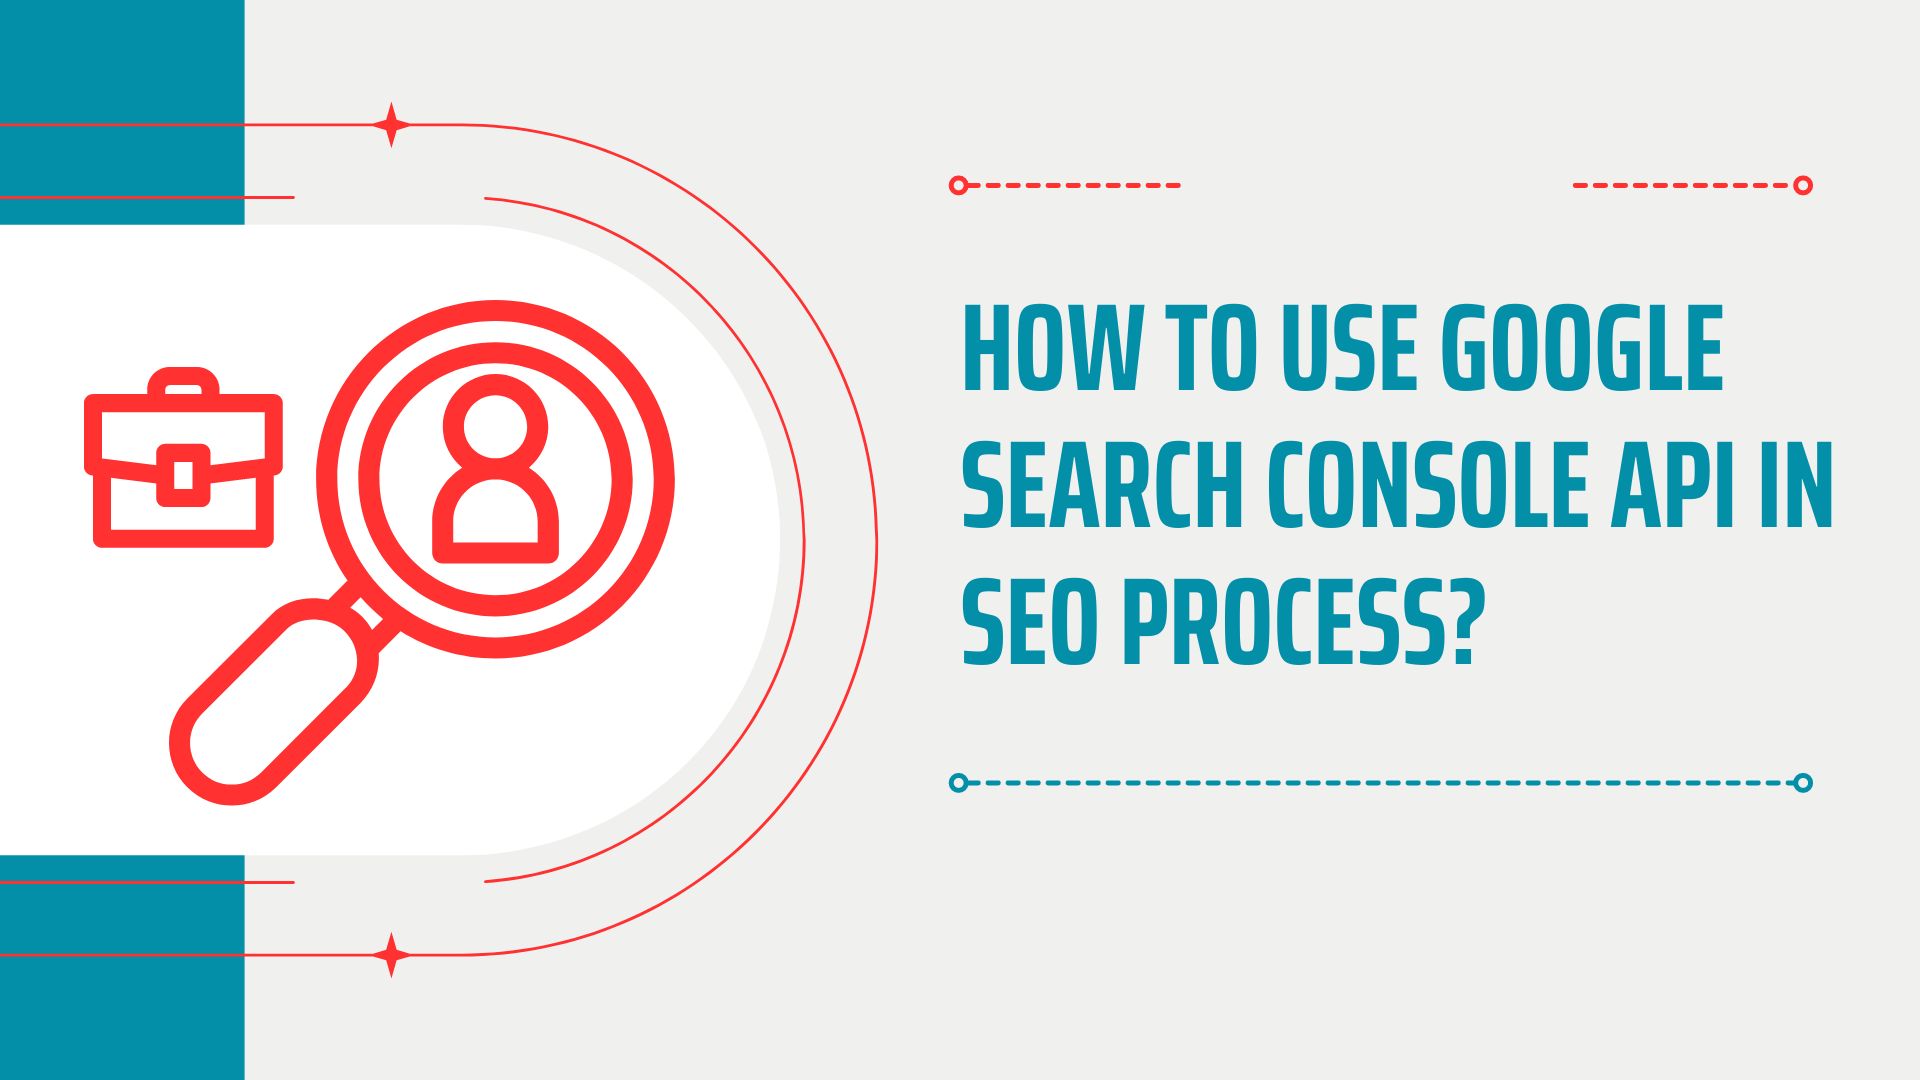 How to use Google Search Console API in SEO process